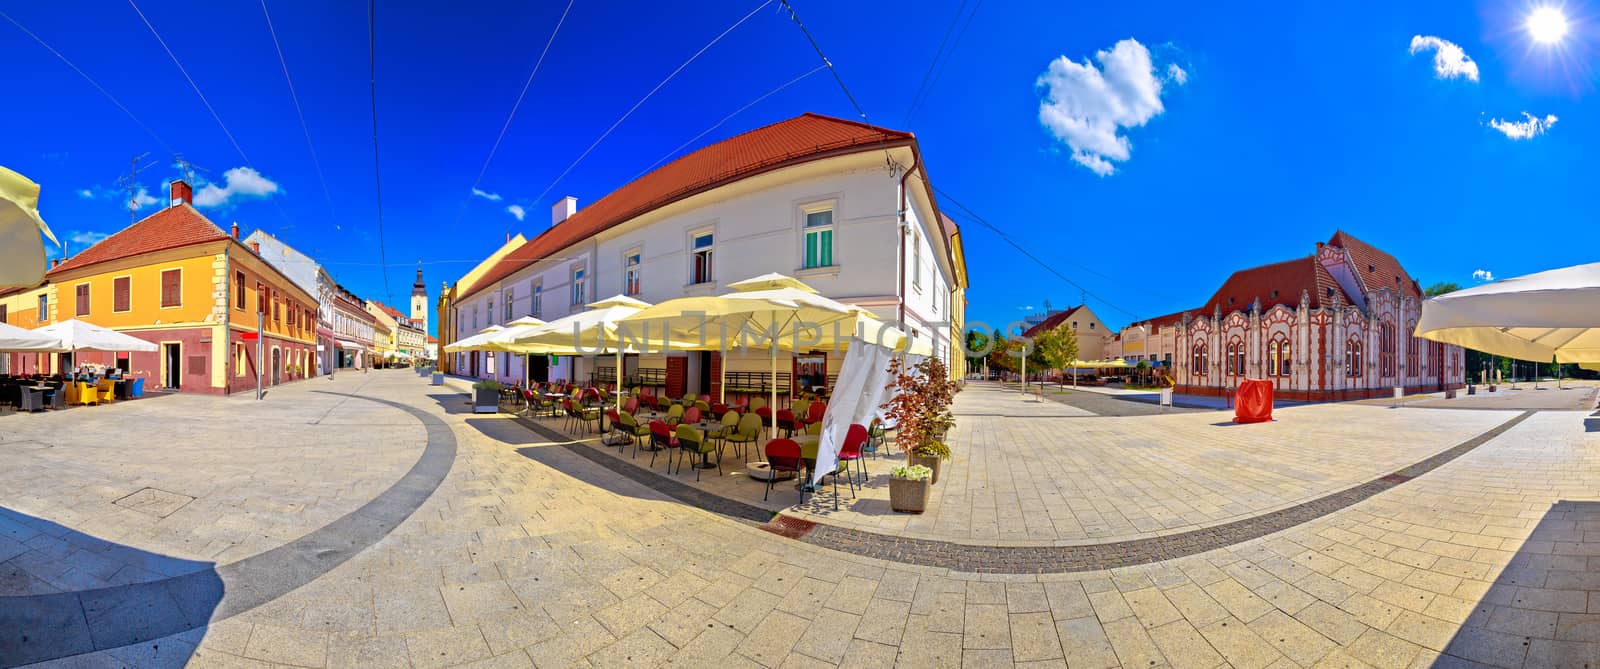 Town of Cakovec square and landmarks panoramic view by xbrchx